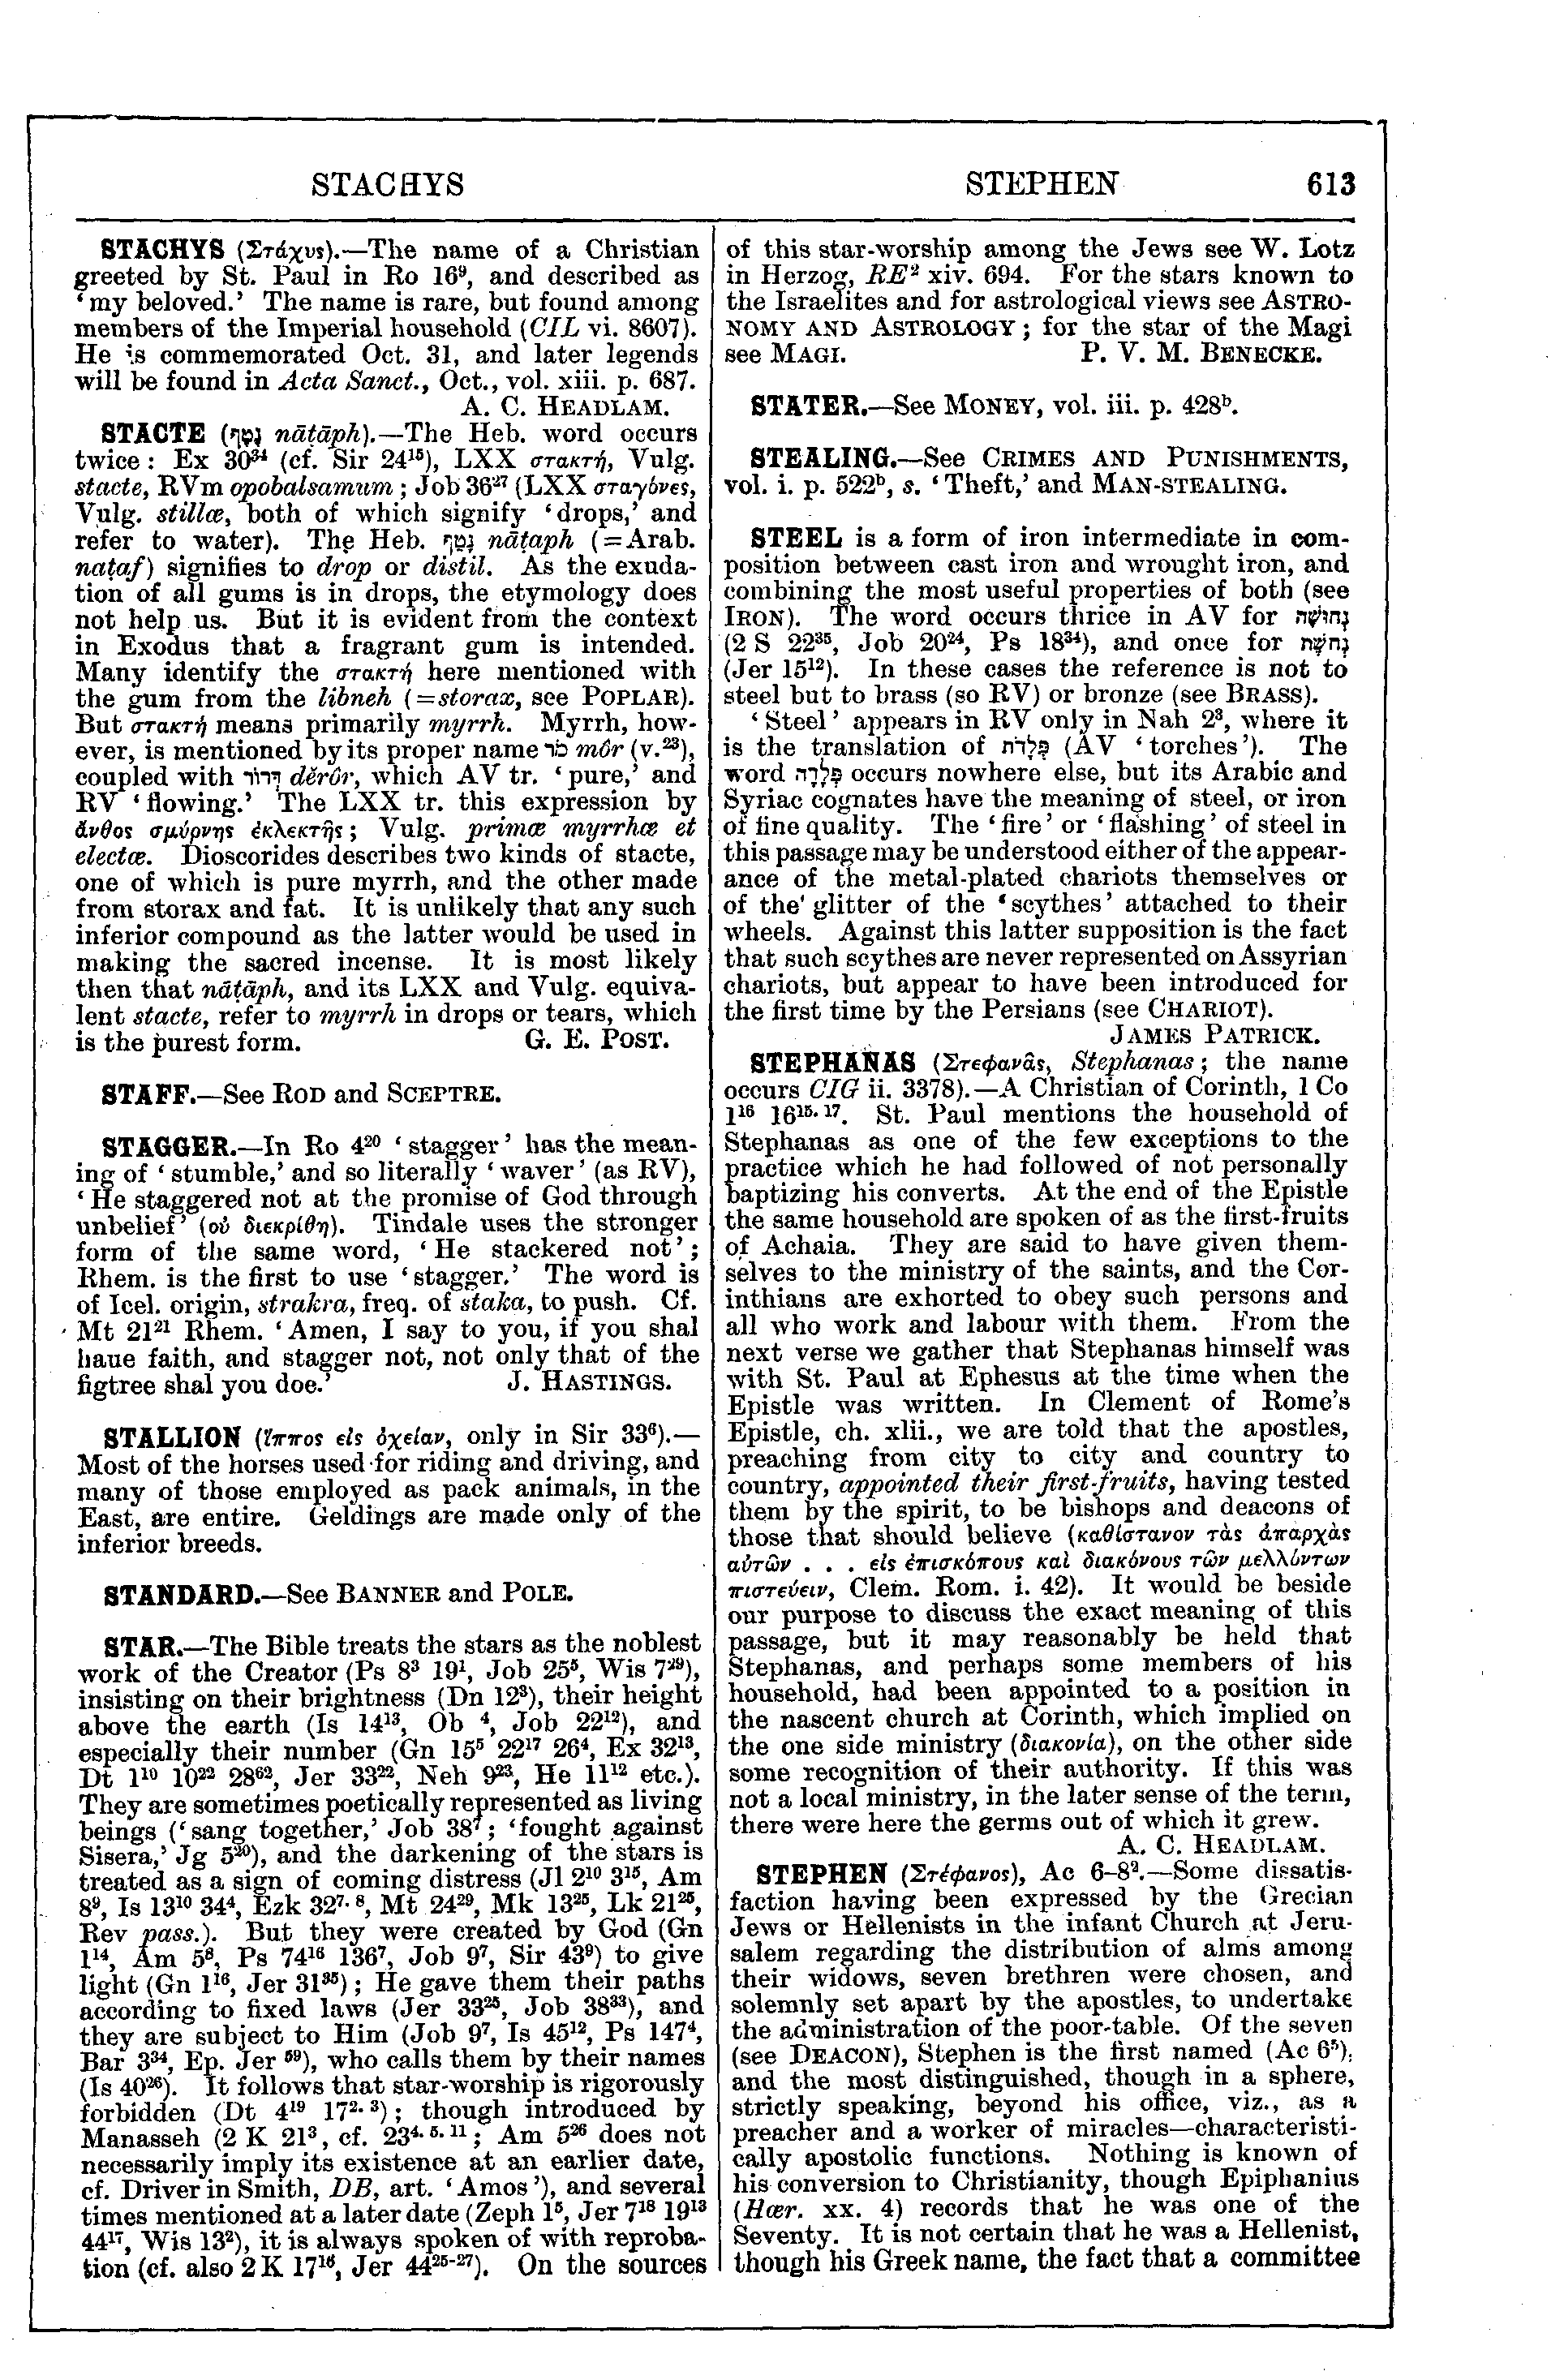 Image of page 613